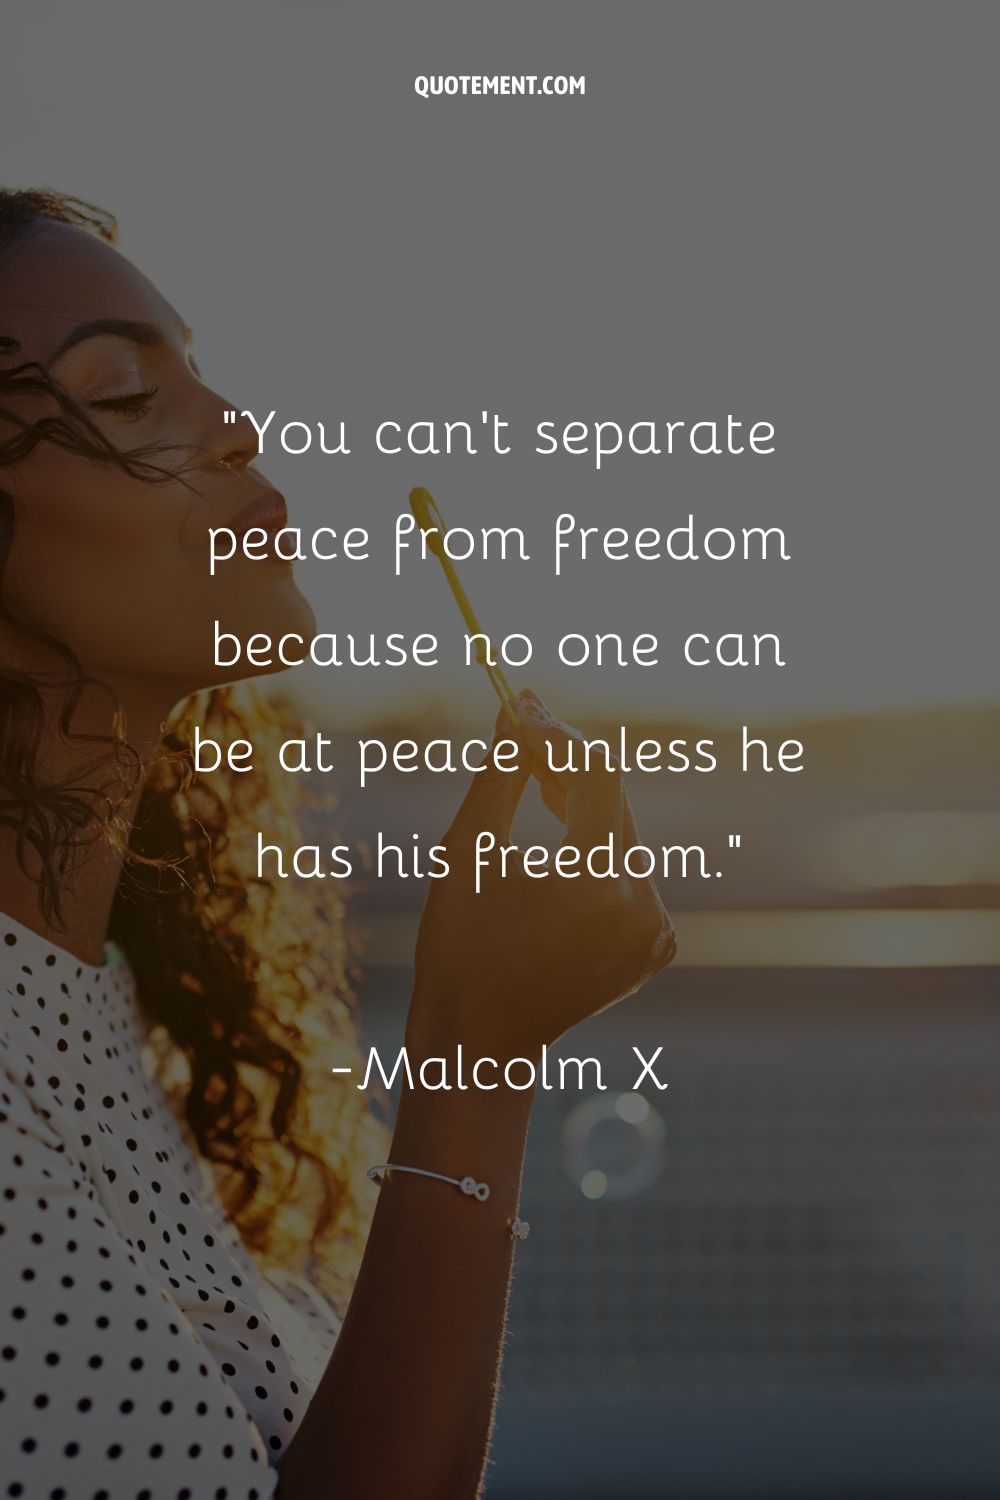 You can’t separate peace from freedom because no one can be at peace unless he has his freedom